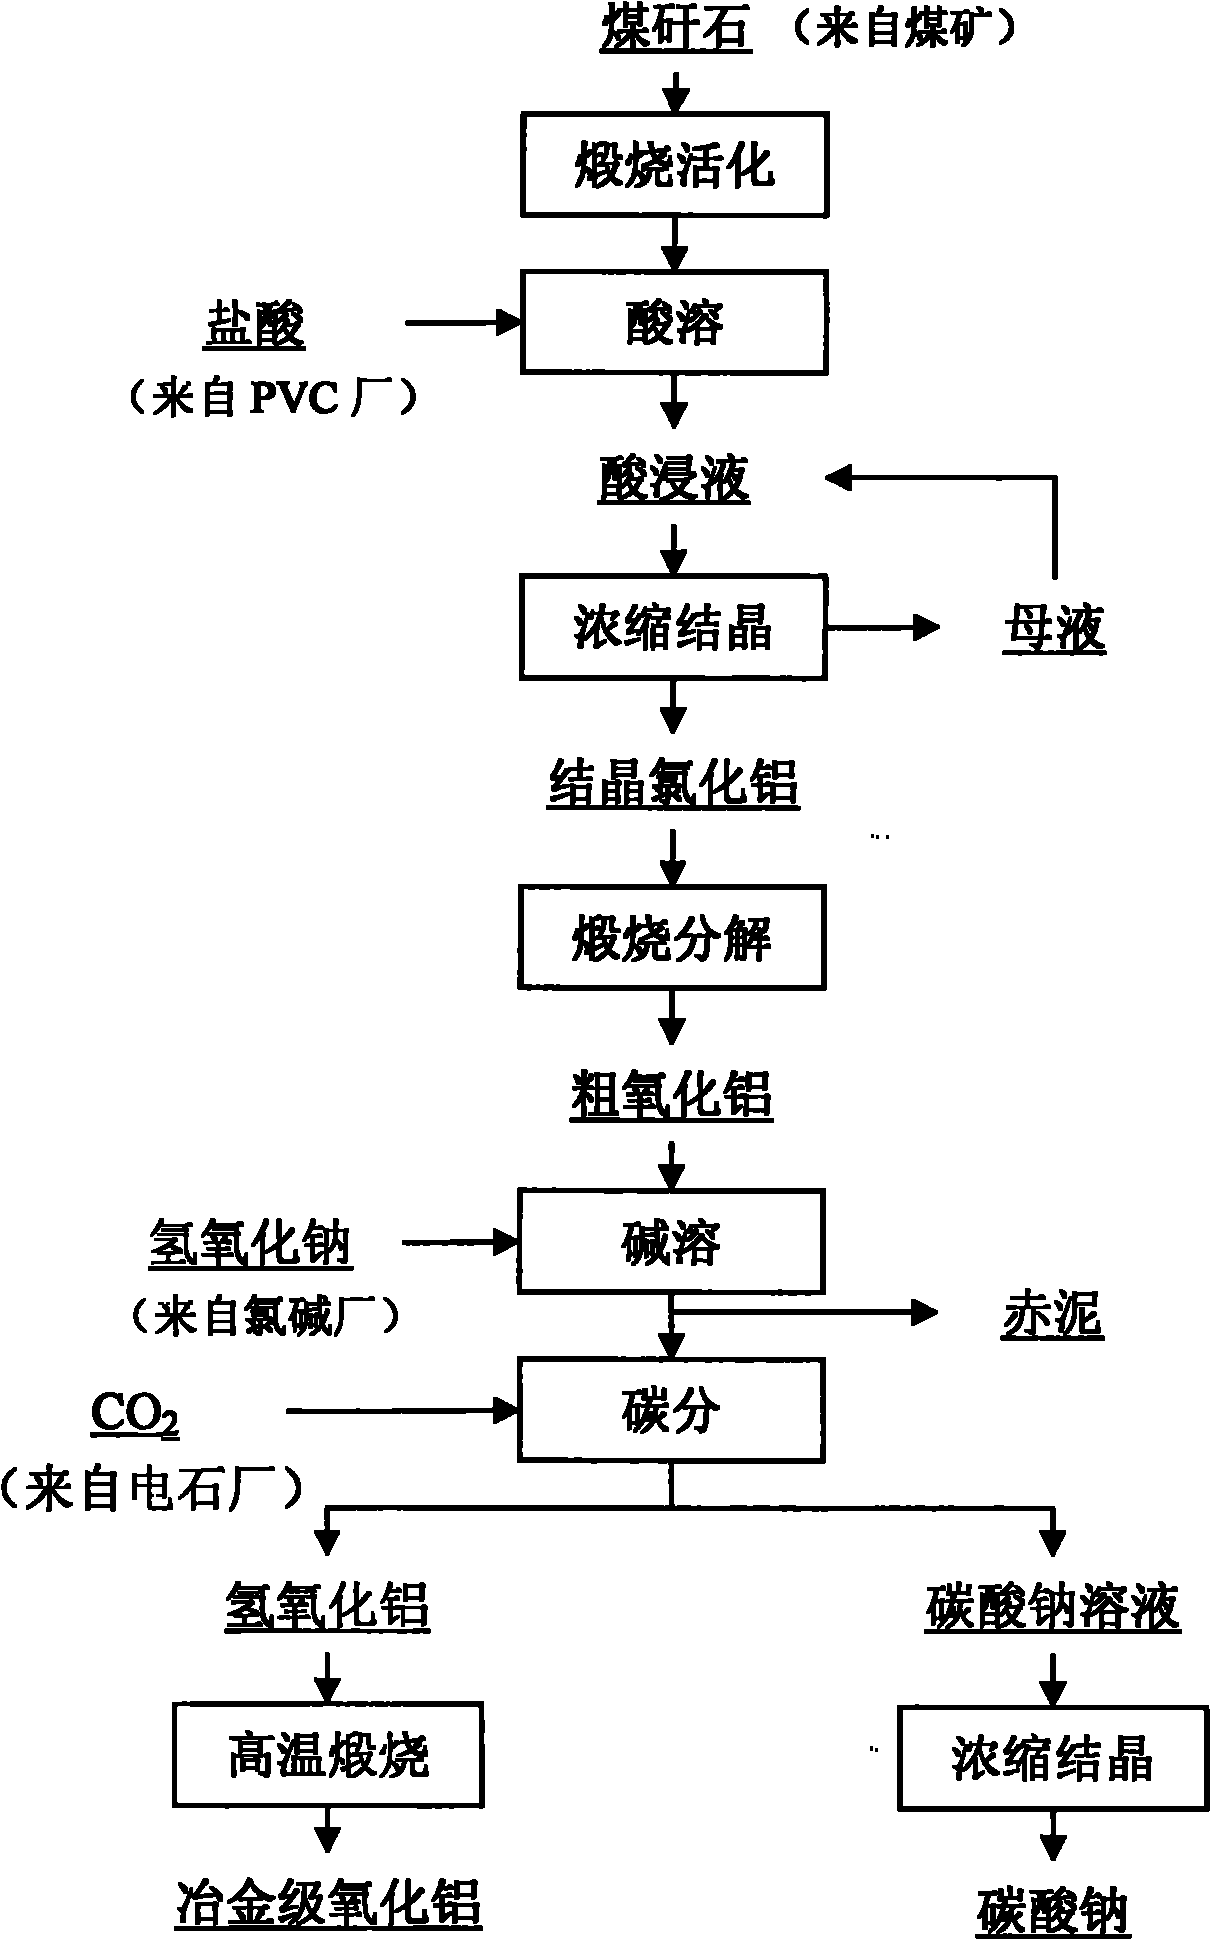 Method for co-producing aluminum oxide and sodium carbonate from coal gangue